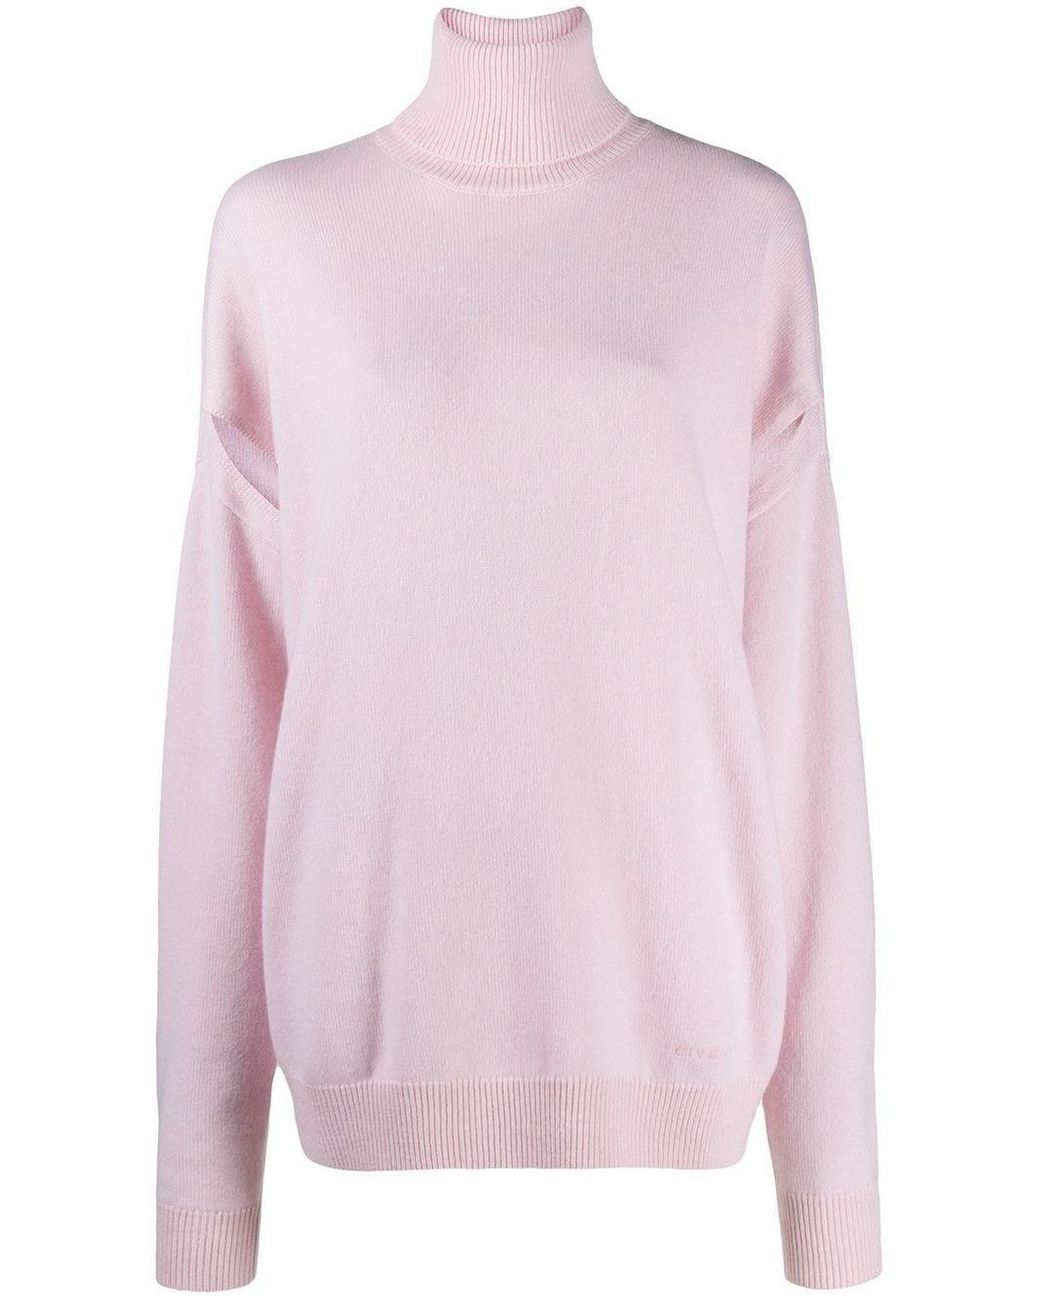 Givenchy Sweater In Cashmere With Cutouts in Pink - Lyst